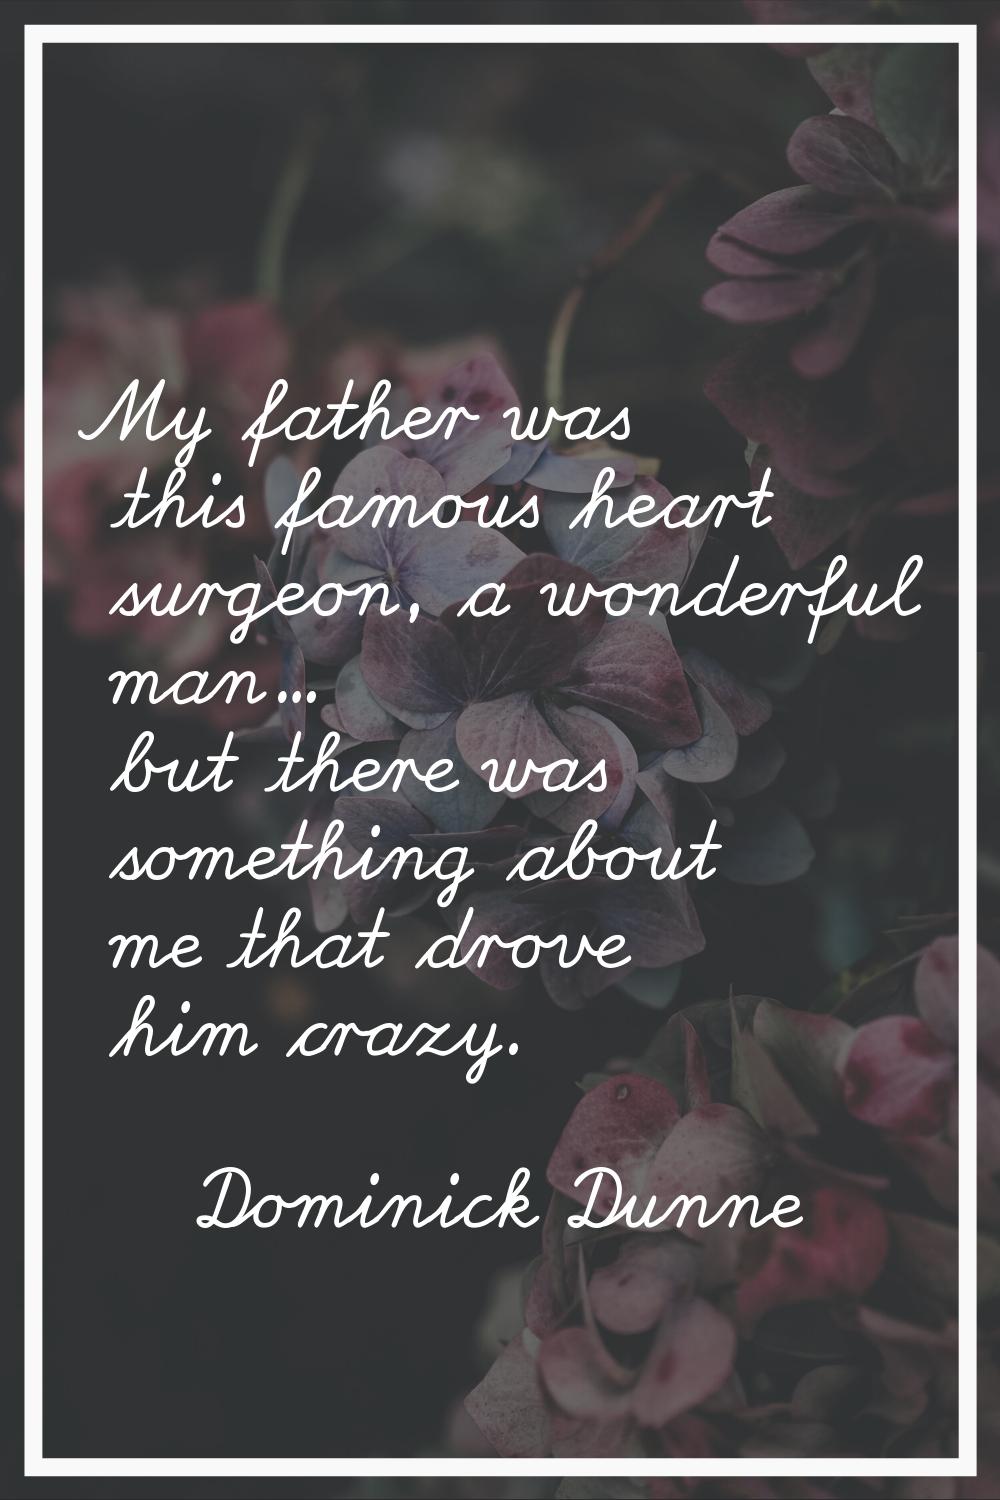 My father was this famous heart surgeon, a wonderful man... but there was something about me that d